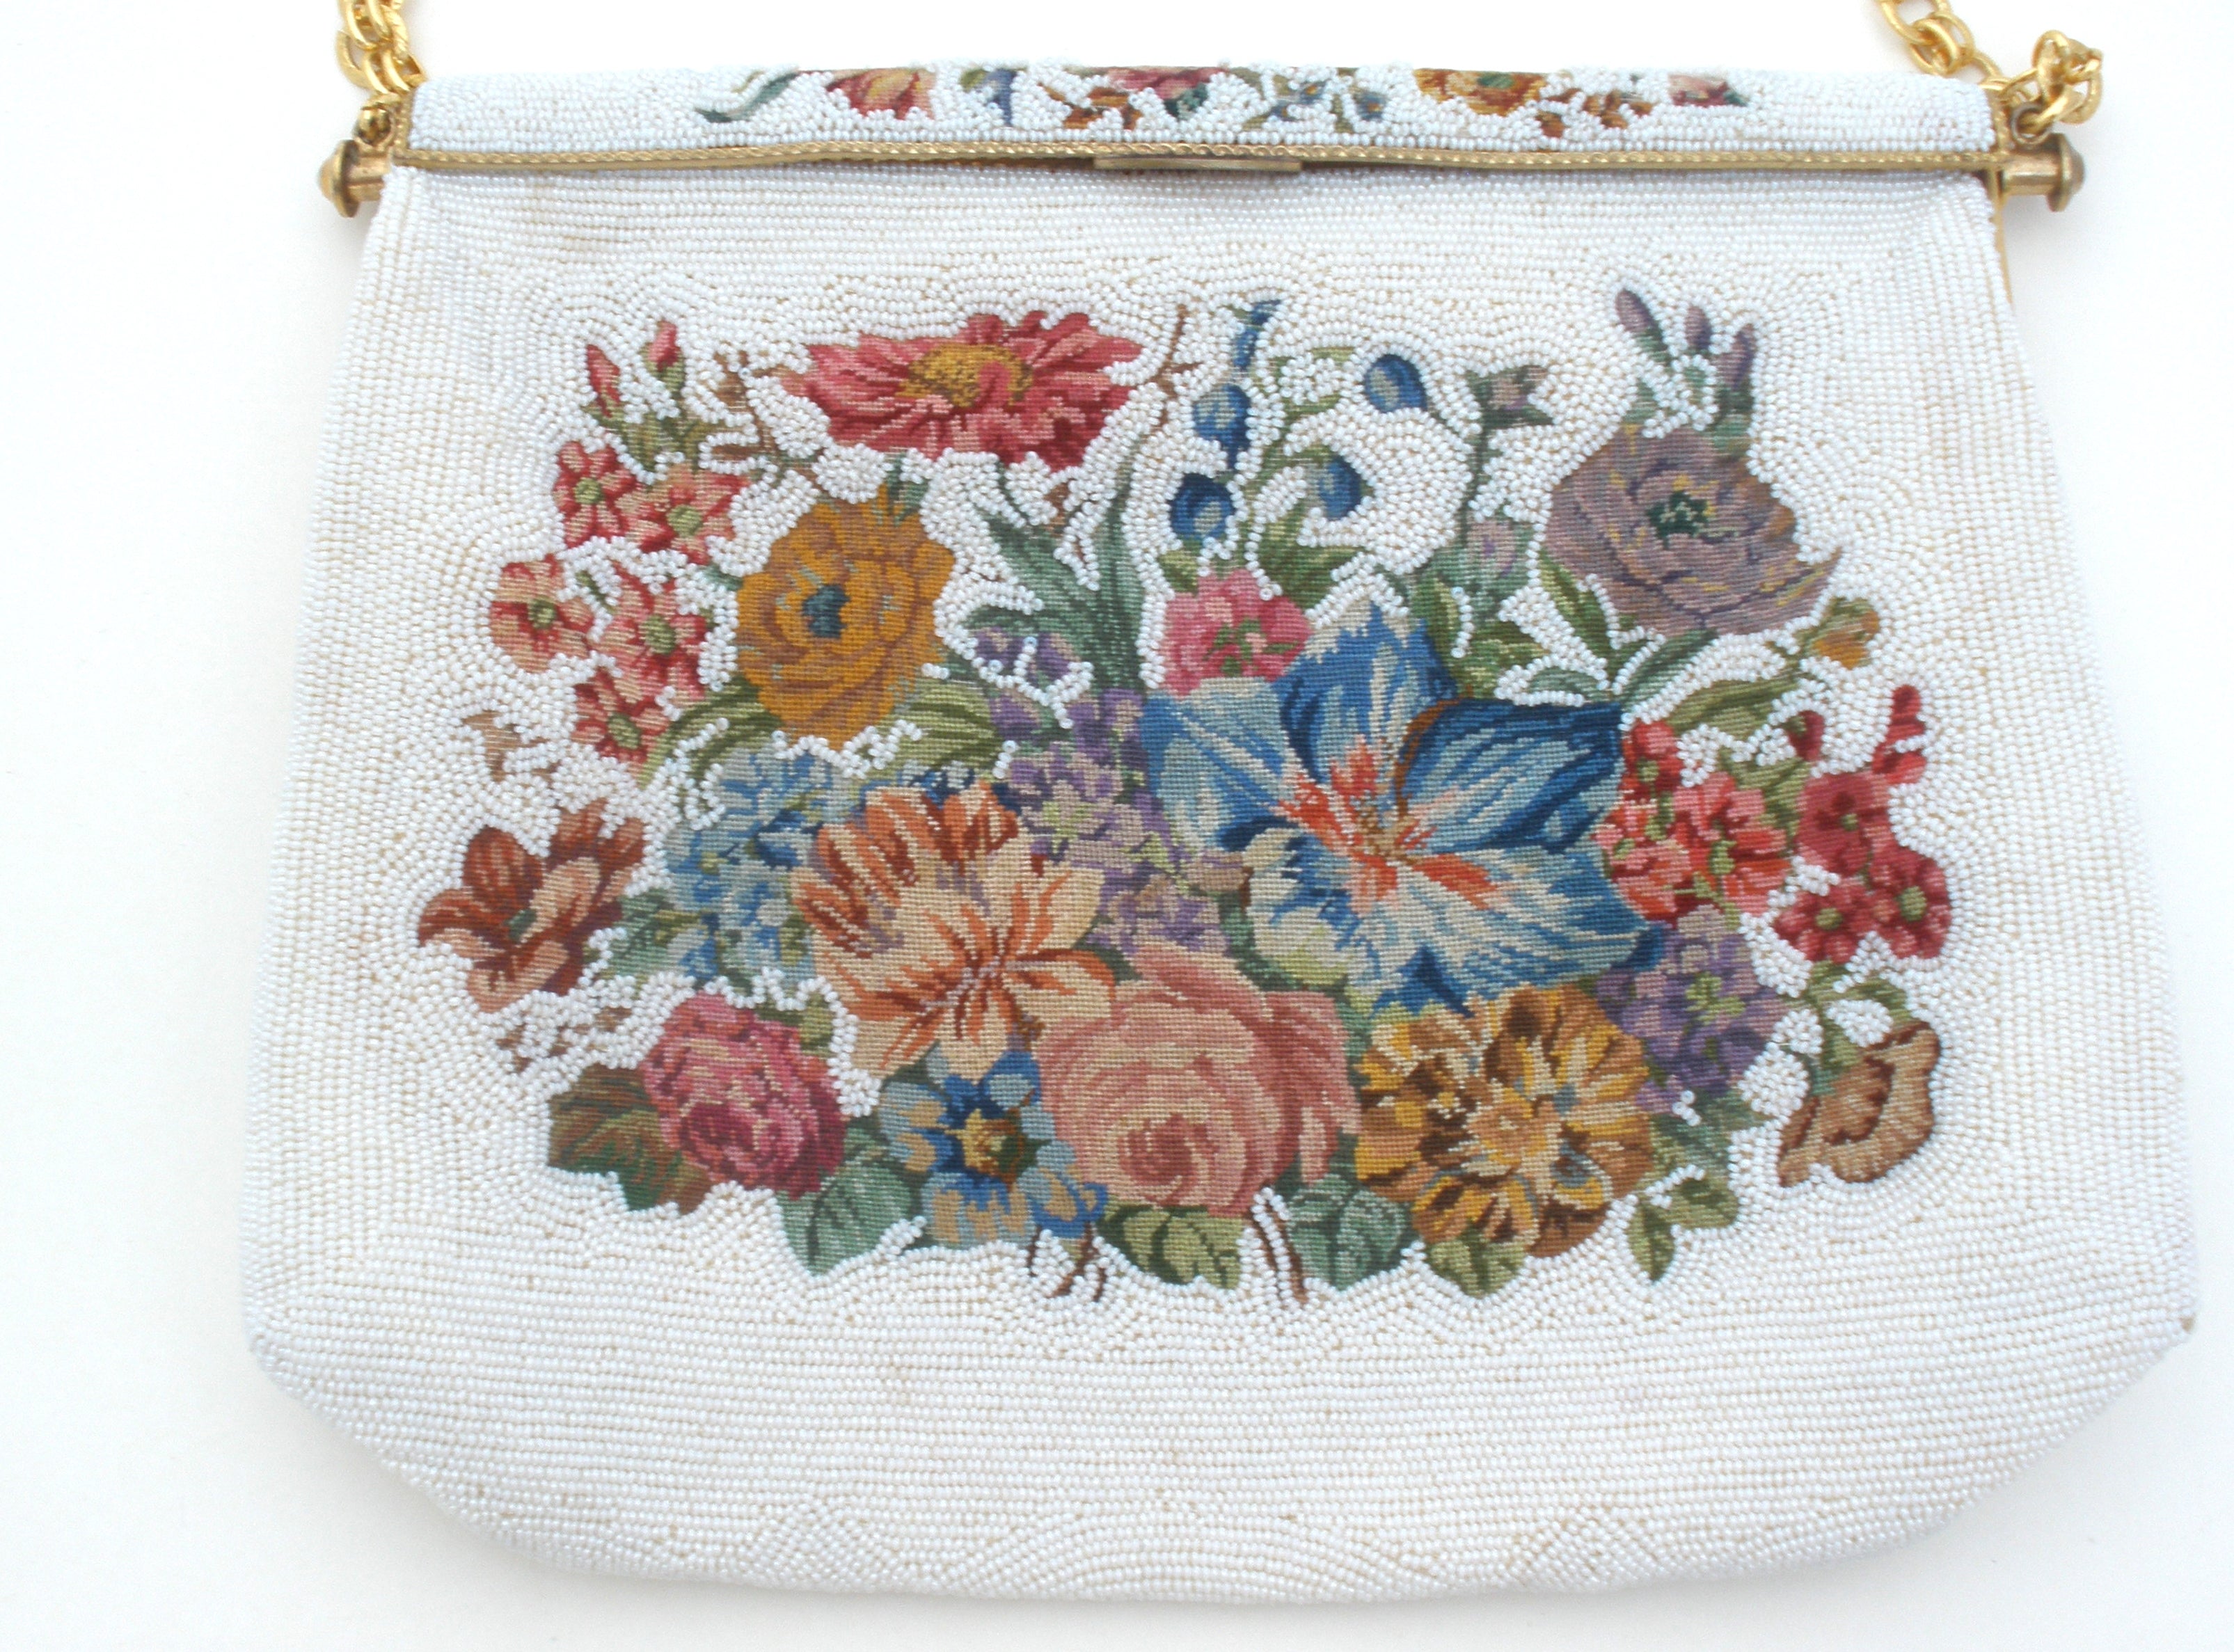 Vintage Beaded & Needlepoint Floral Purse France – The Jewelry